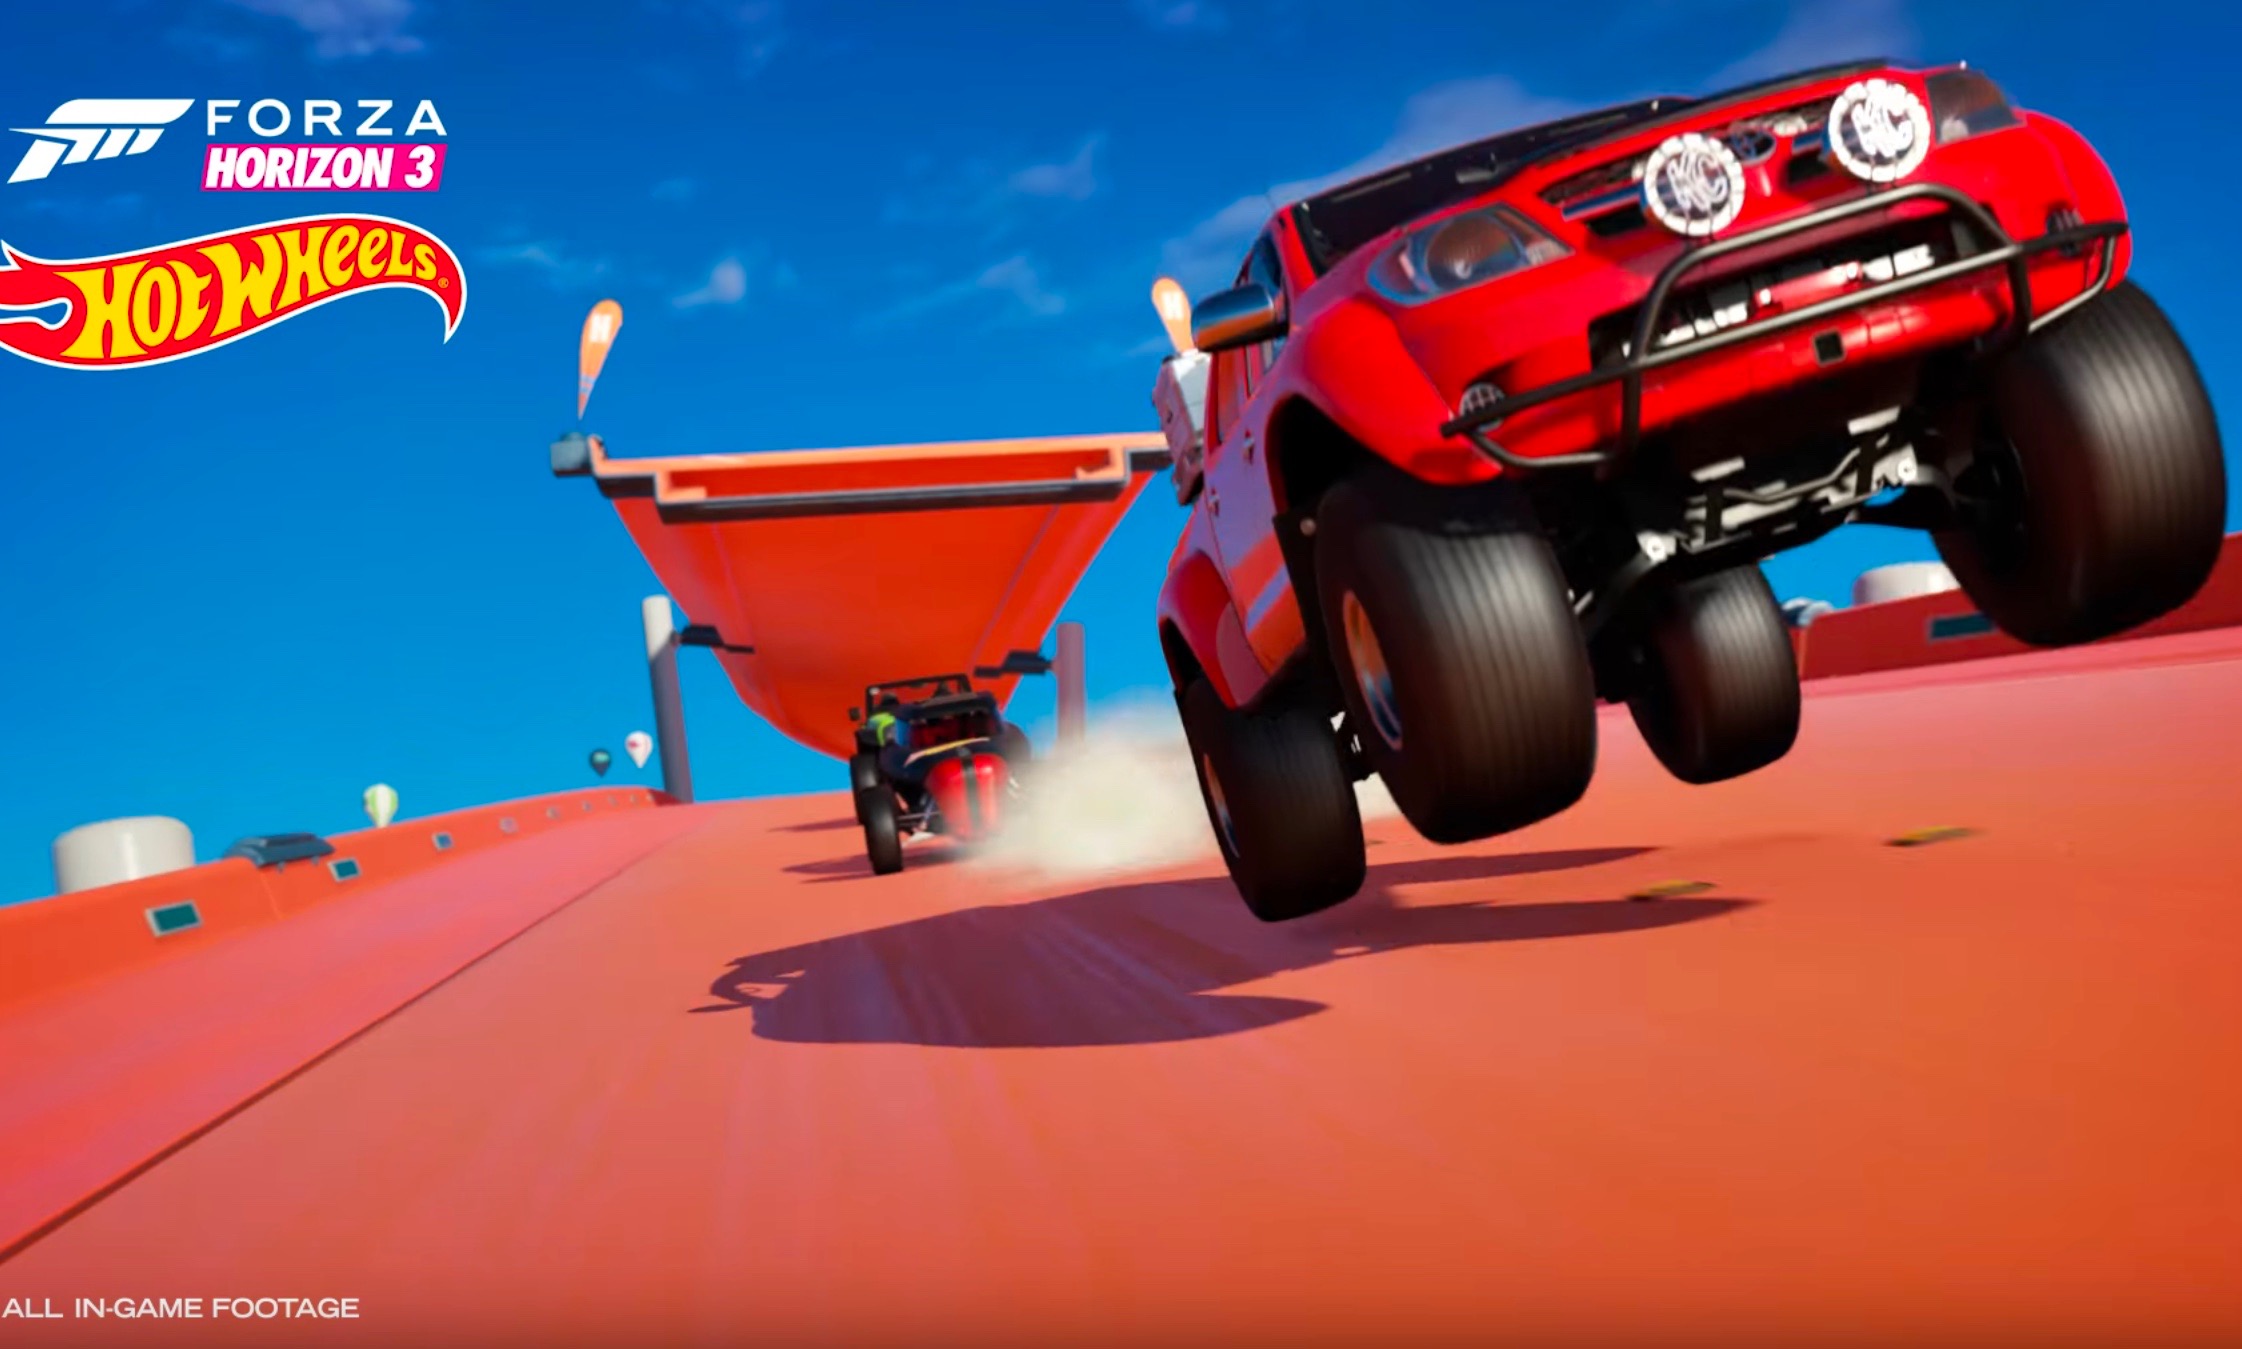 Get your Hot Wheels on - Forza Horizon 3 expansion pack looks